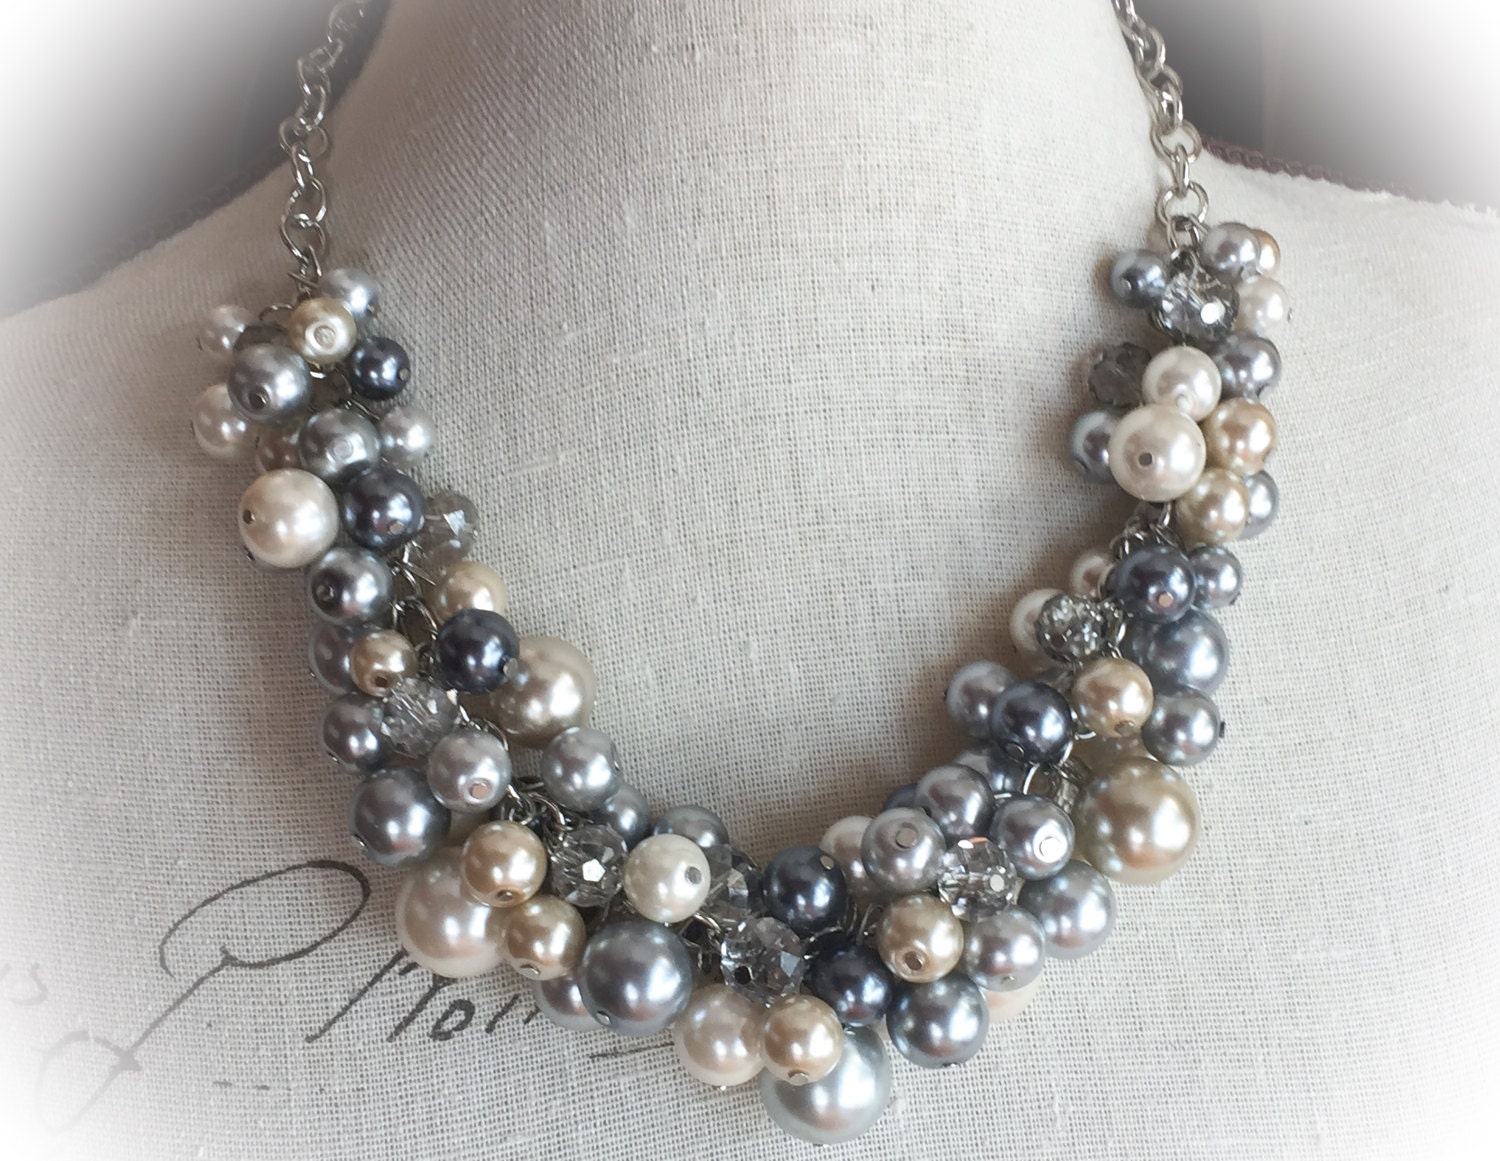 Grey champagne ivory together in this cluster pearl necklace- bridesmaid jewelry